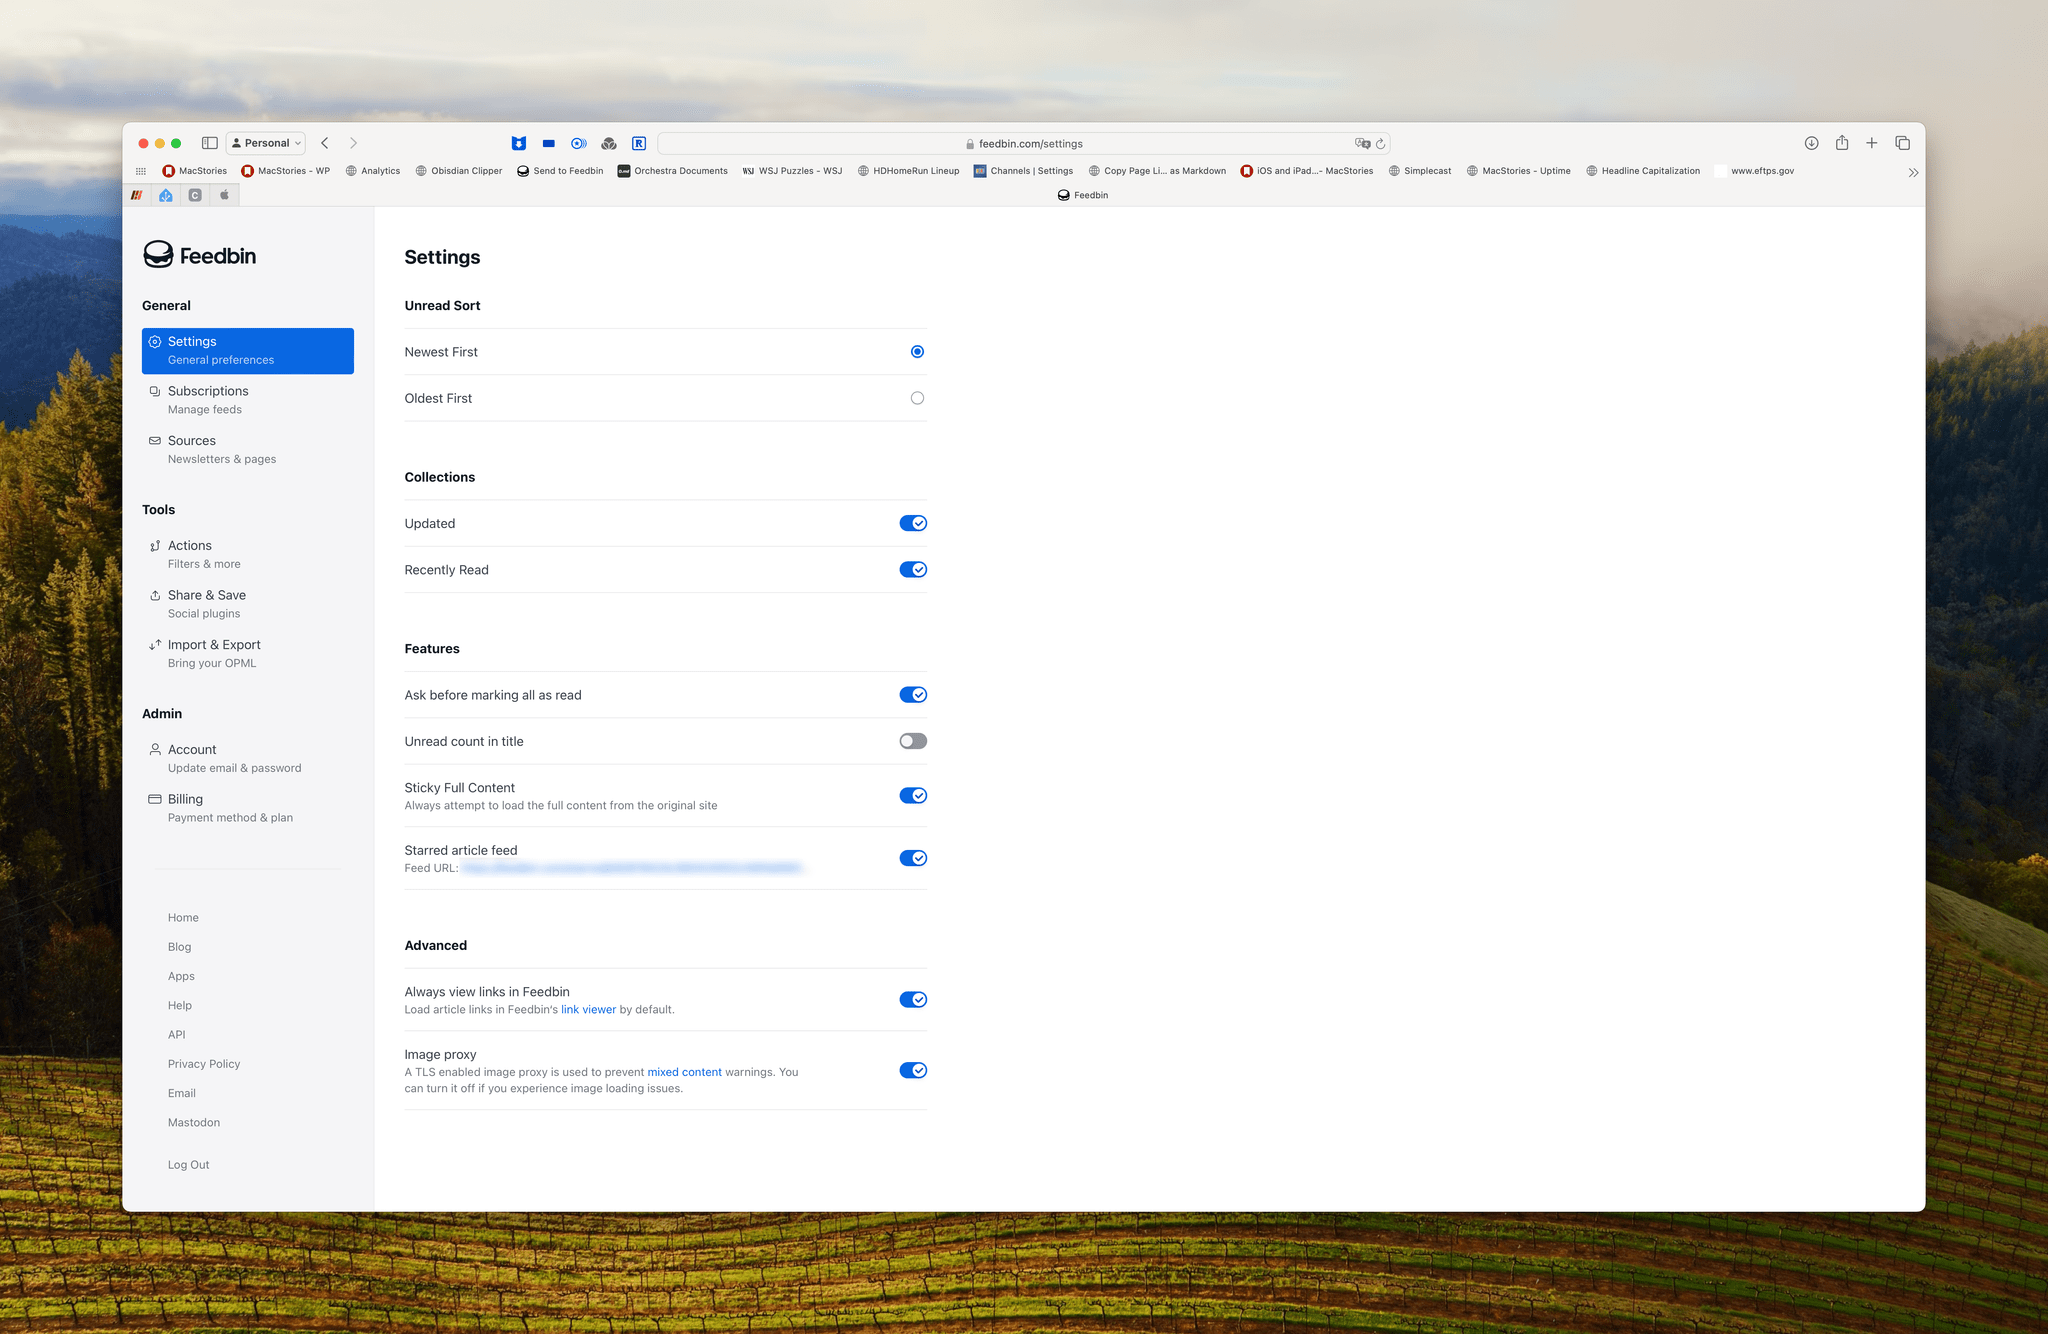 Feedbin's settings include a personalized feed of your starred articles.